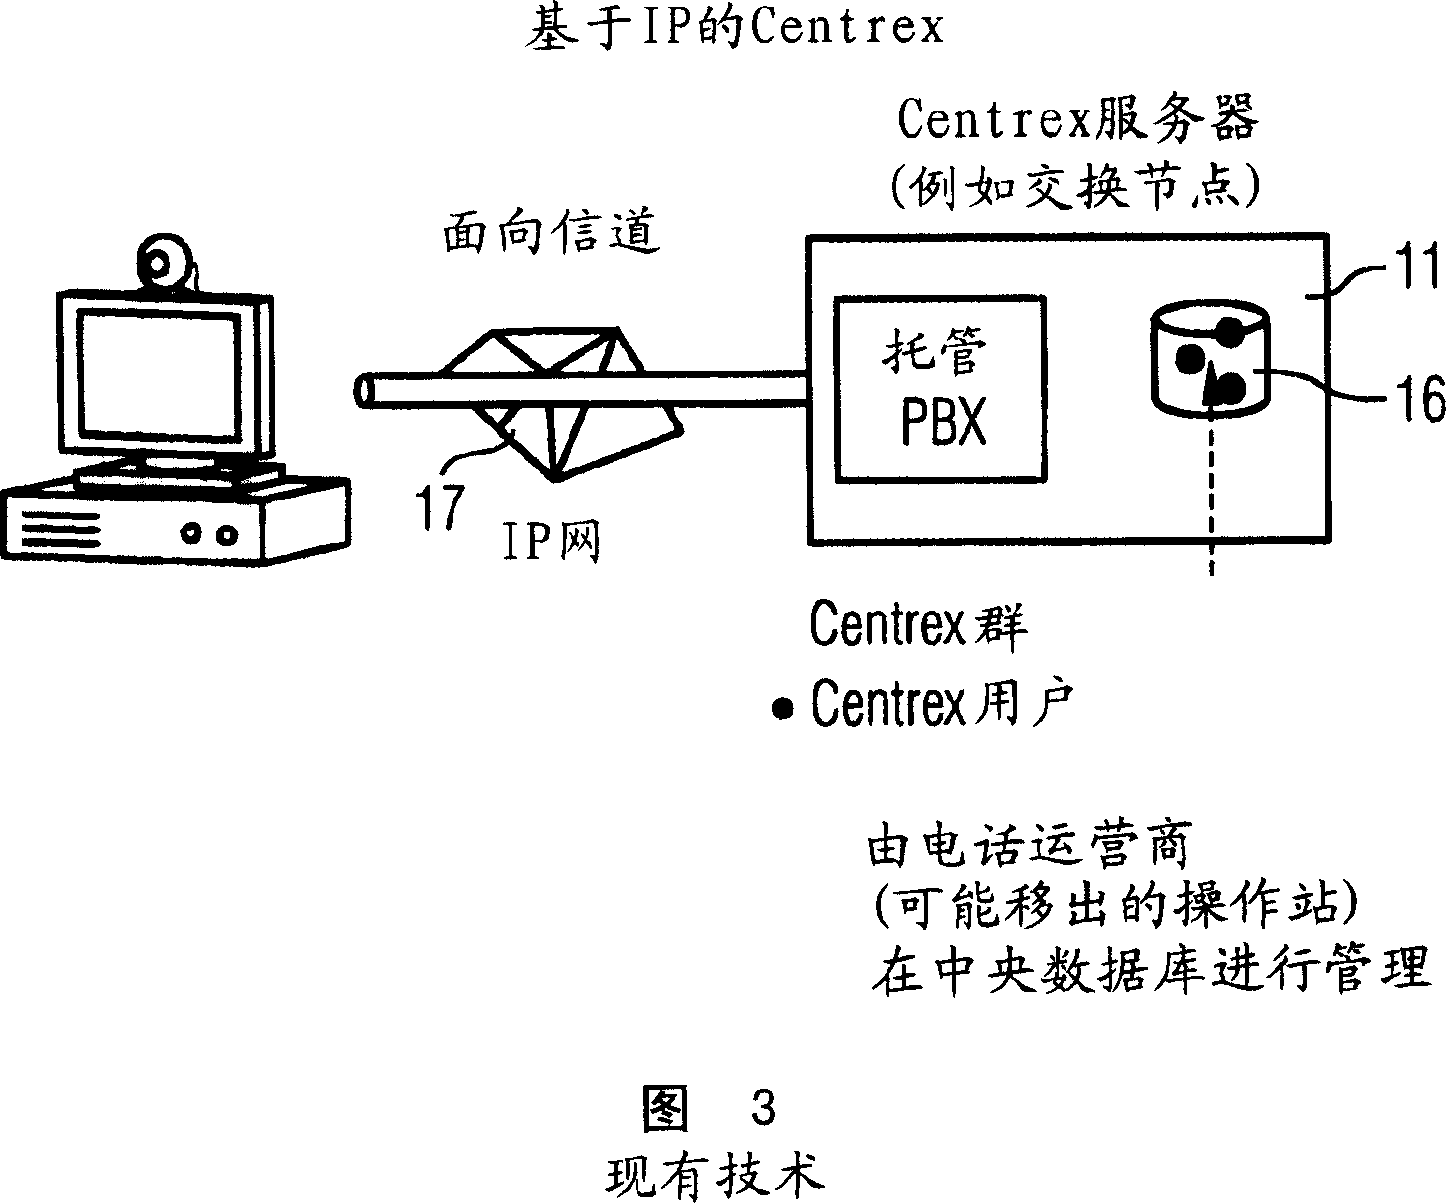 Method for administering functional centrex characteristics using x.509 attribute certificates